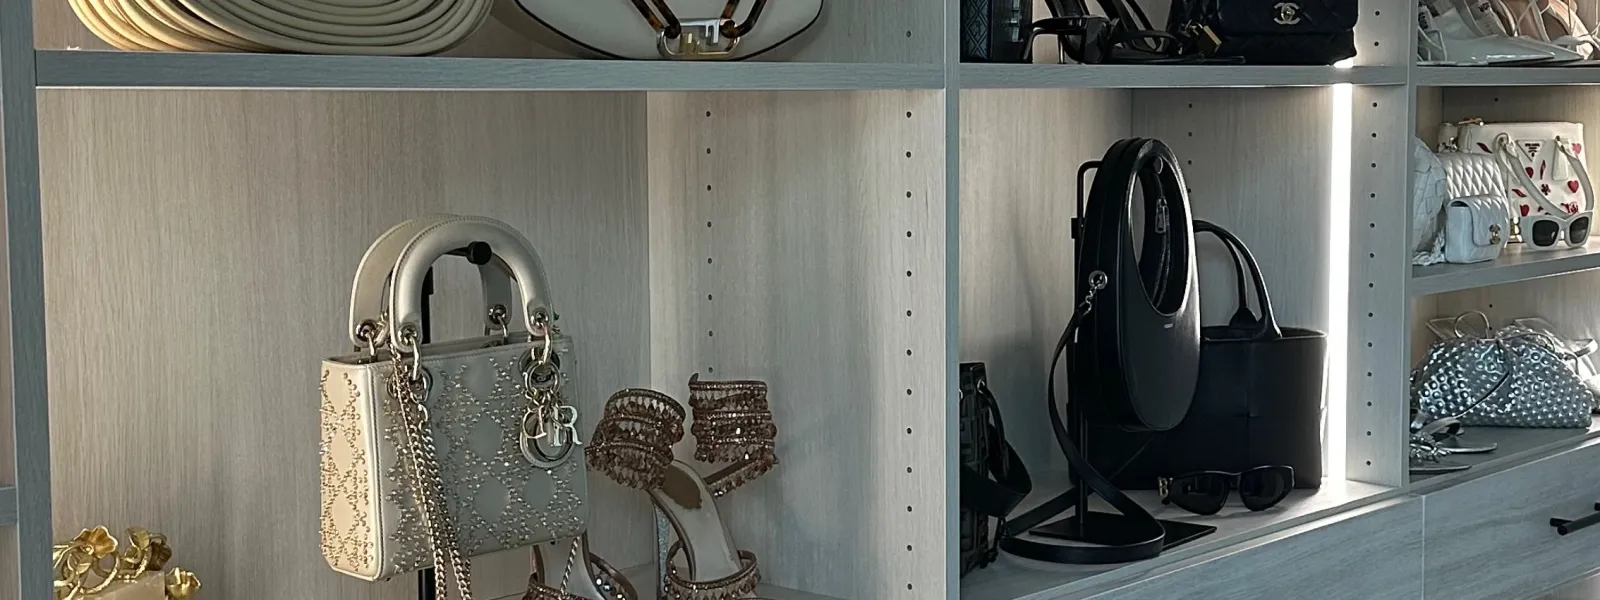 a shelf with shoes on it